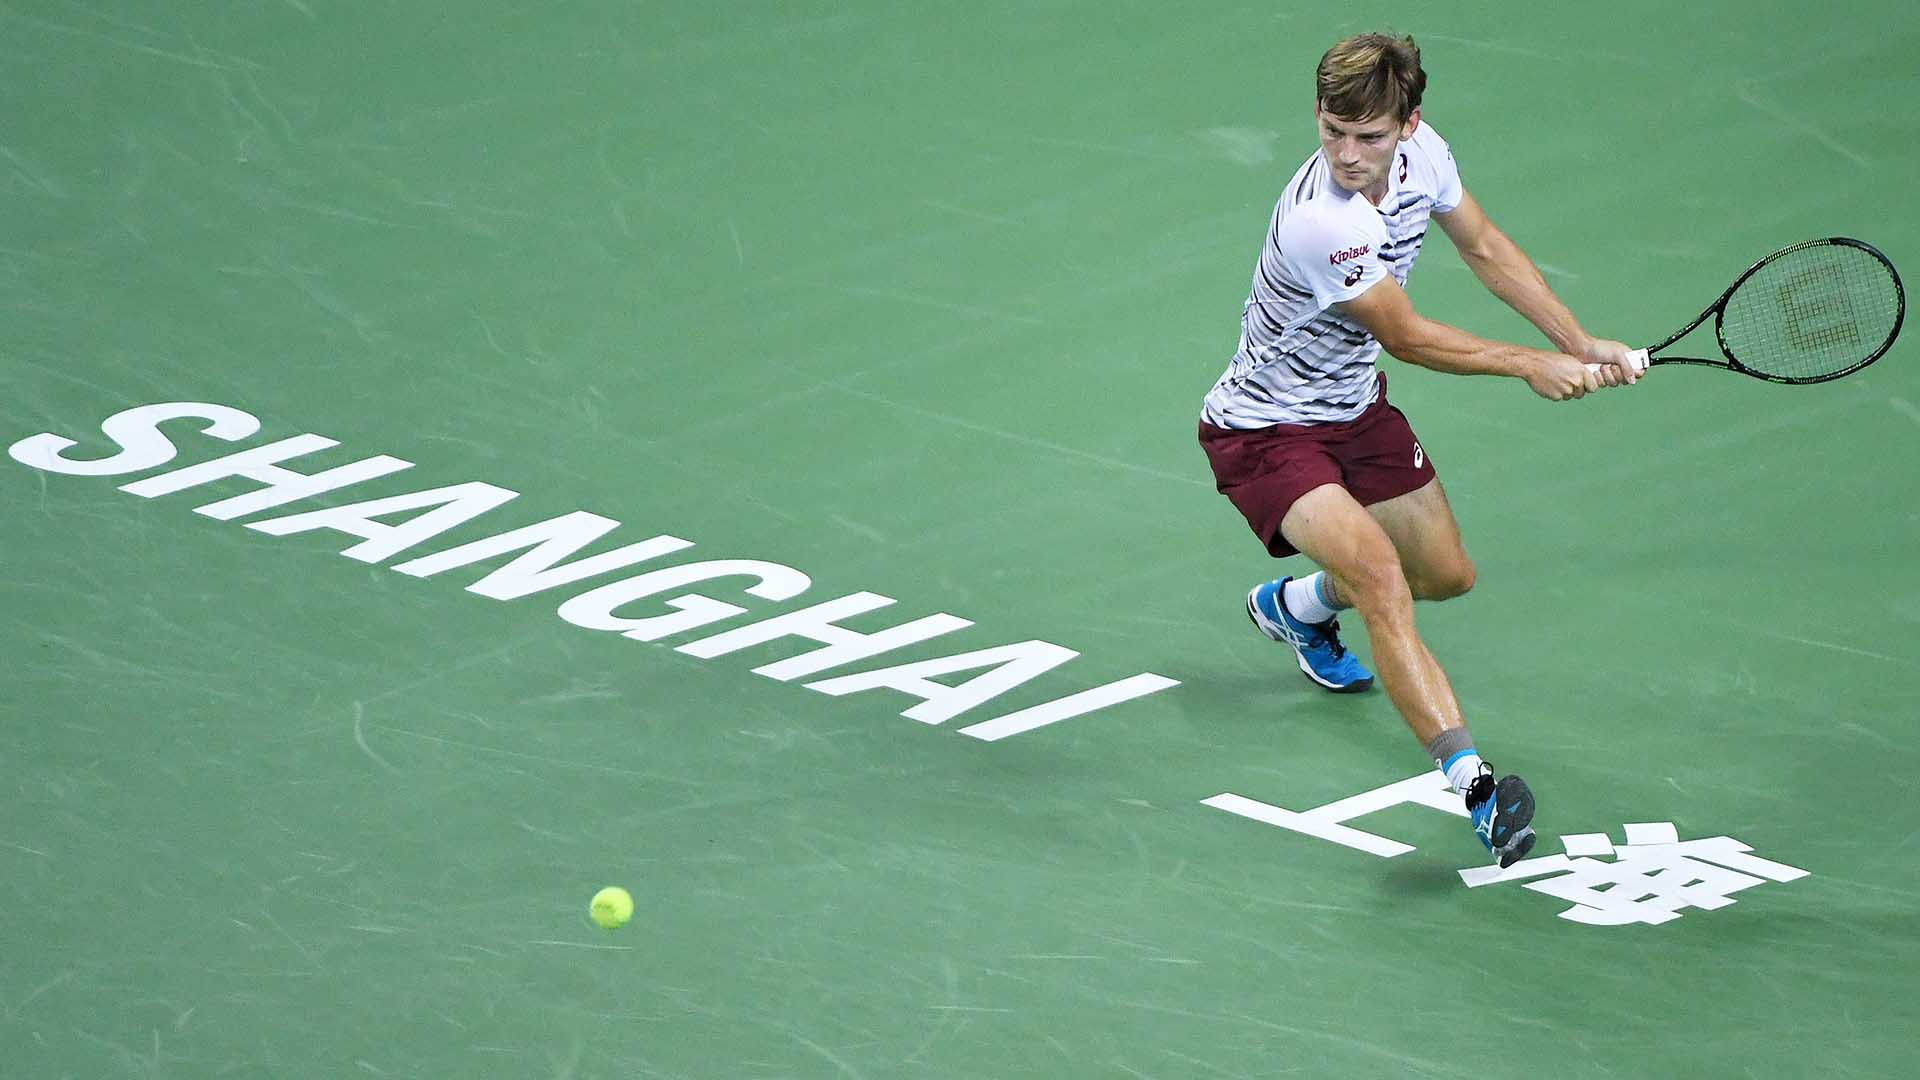 David Goffin advanced to the Rolex Shanghai Masters quarter-finals for the first time in 2016.